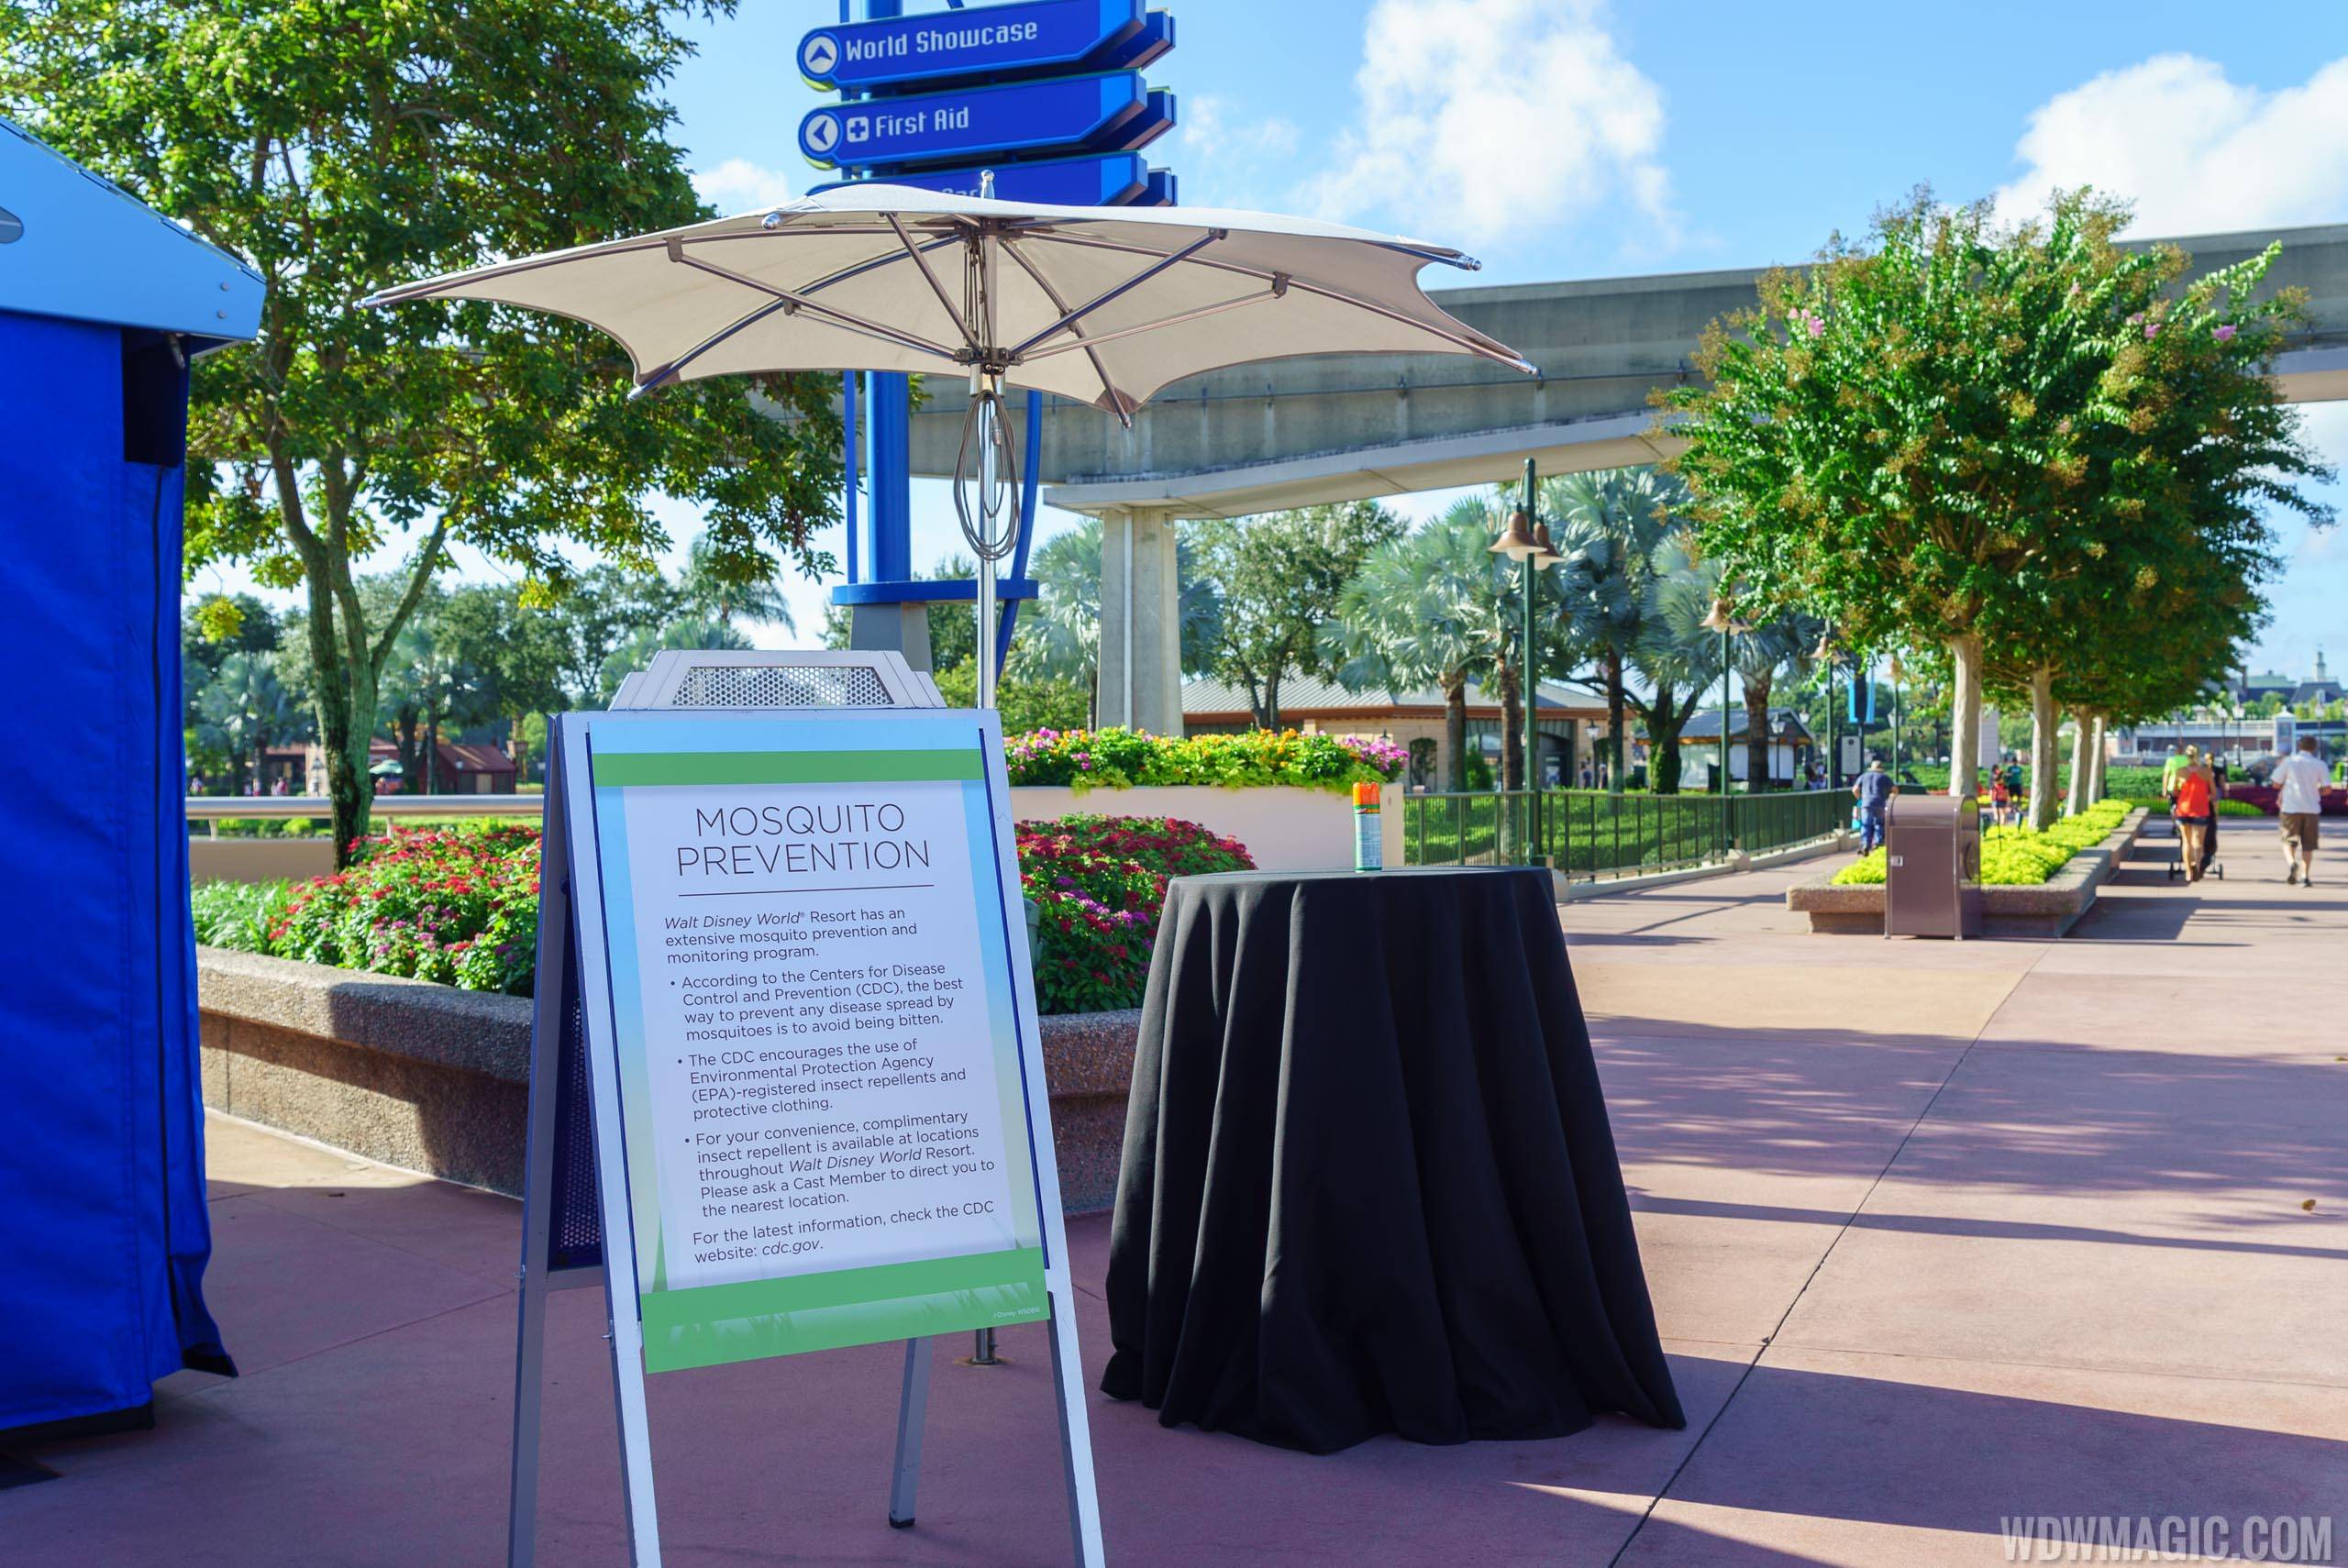 Mosquito Prevention station at Epcot